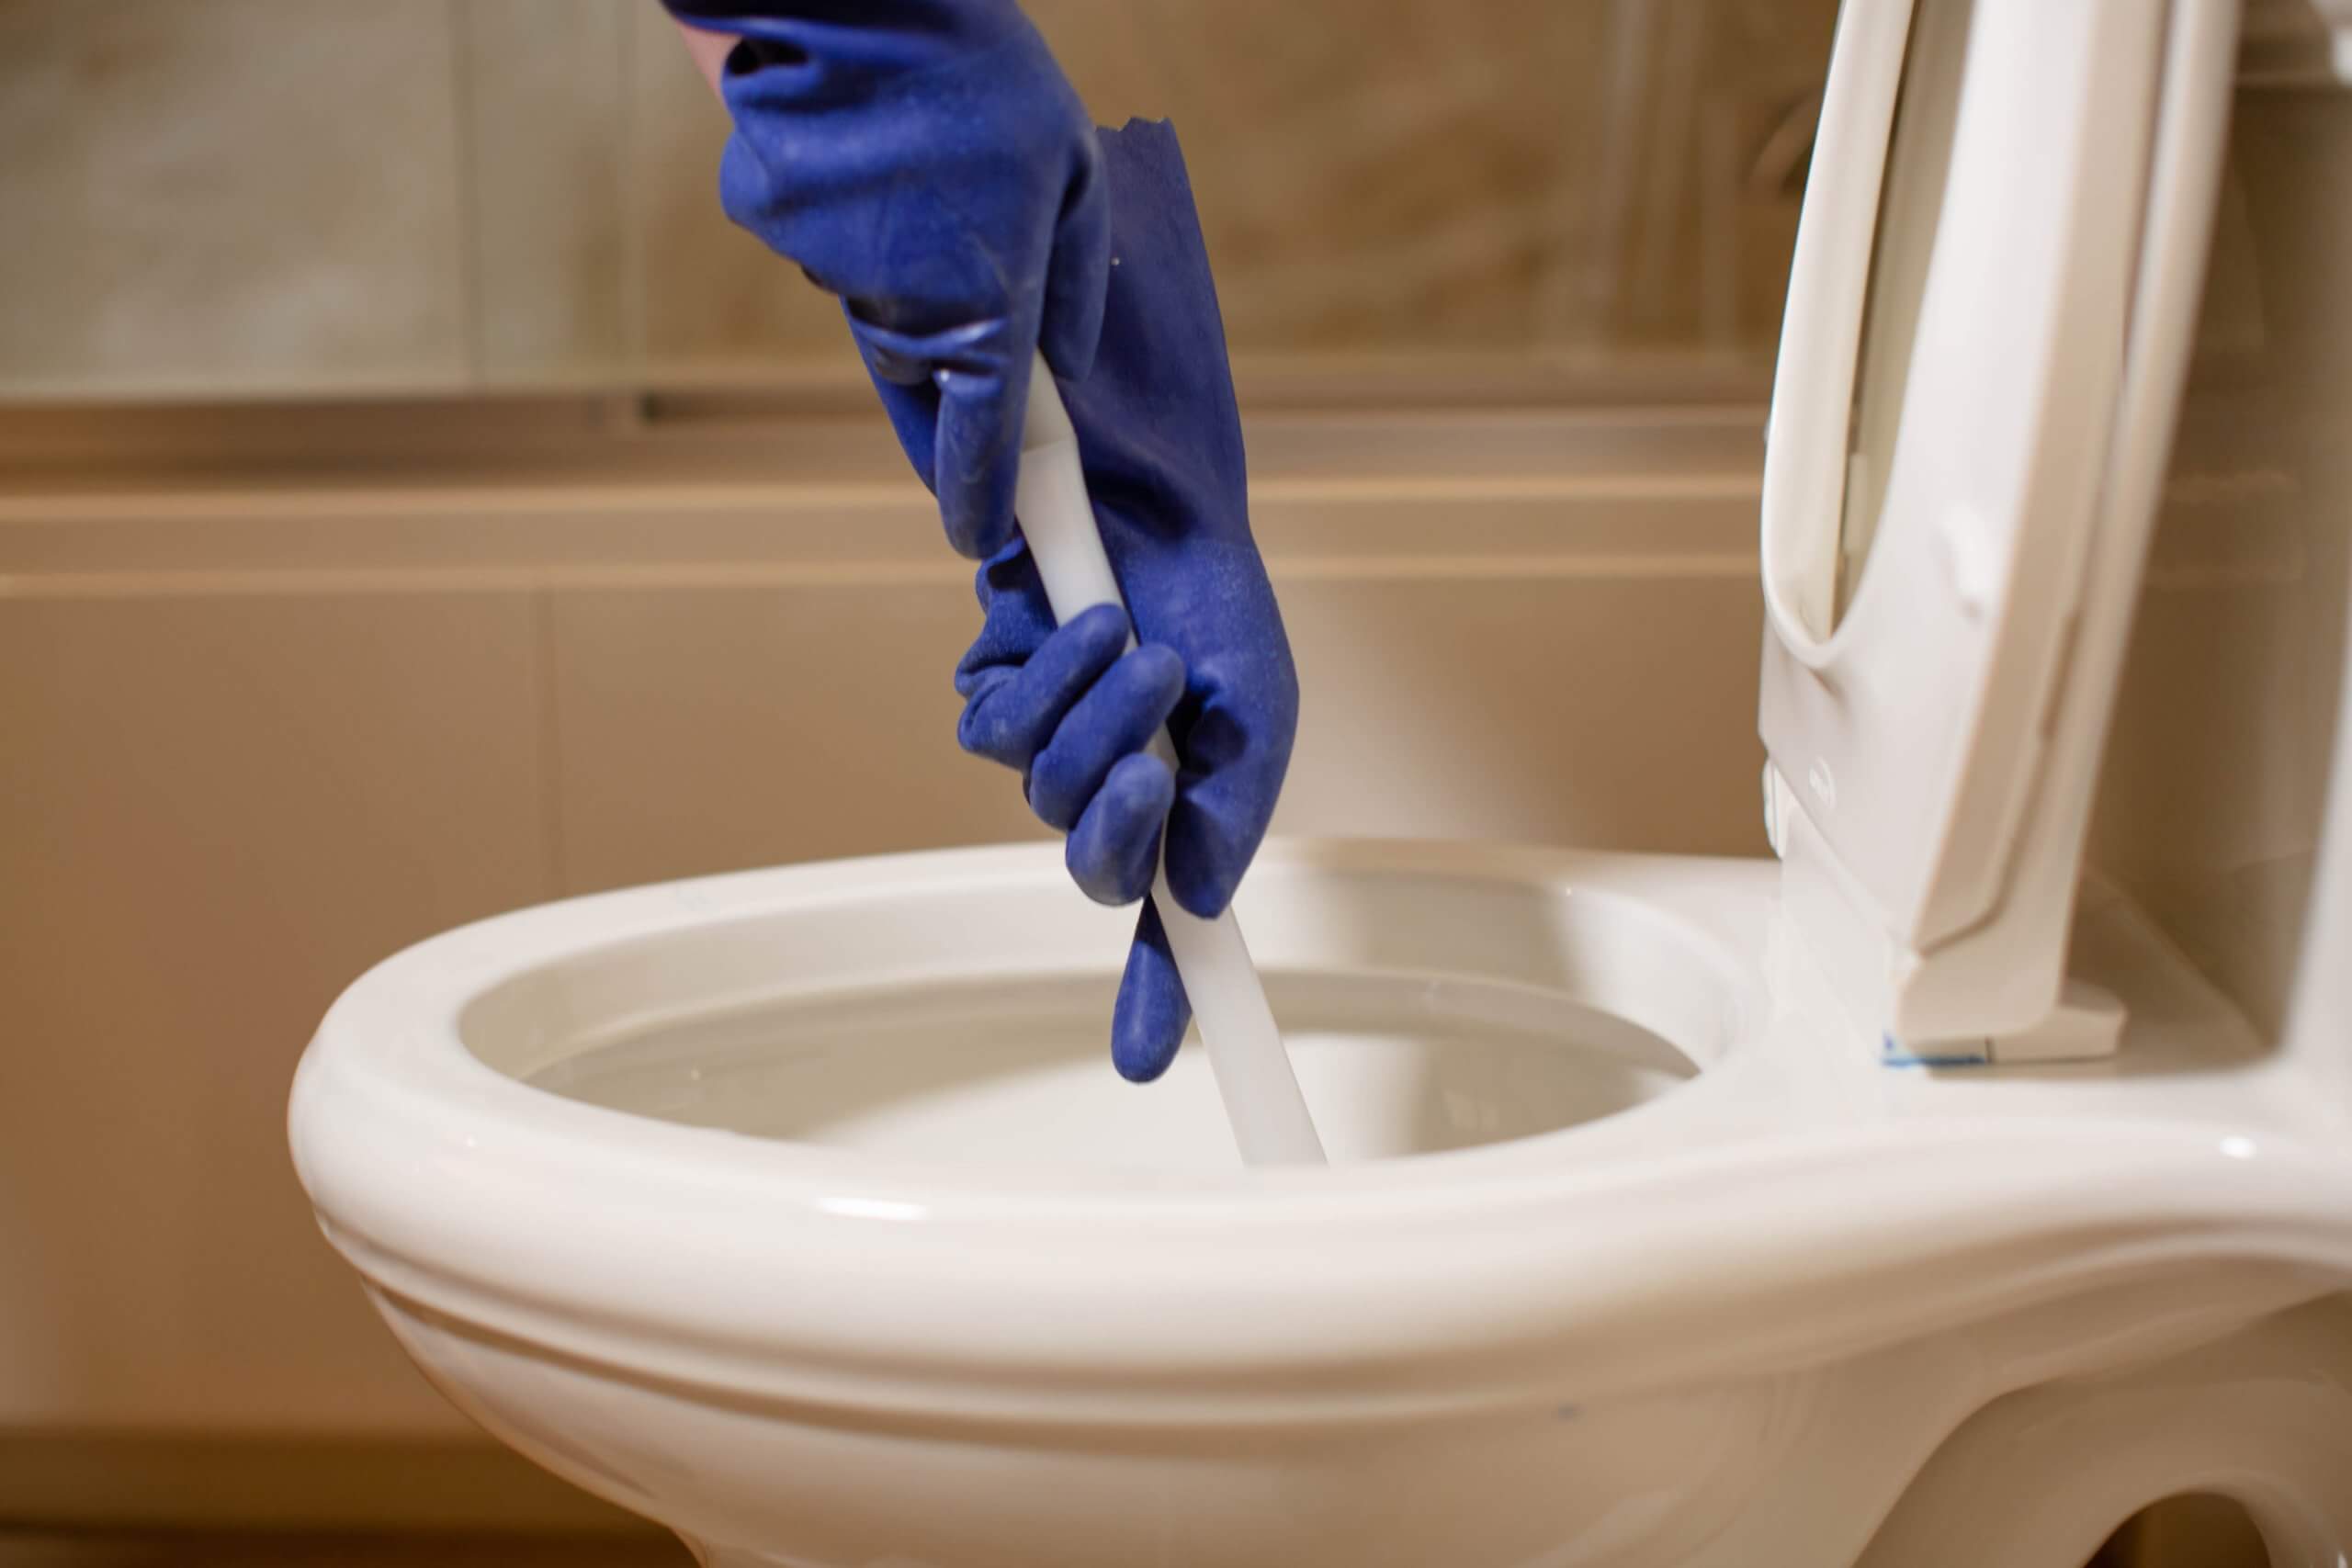 What to Do When the Toilet Clogs